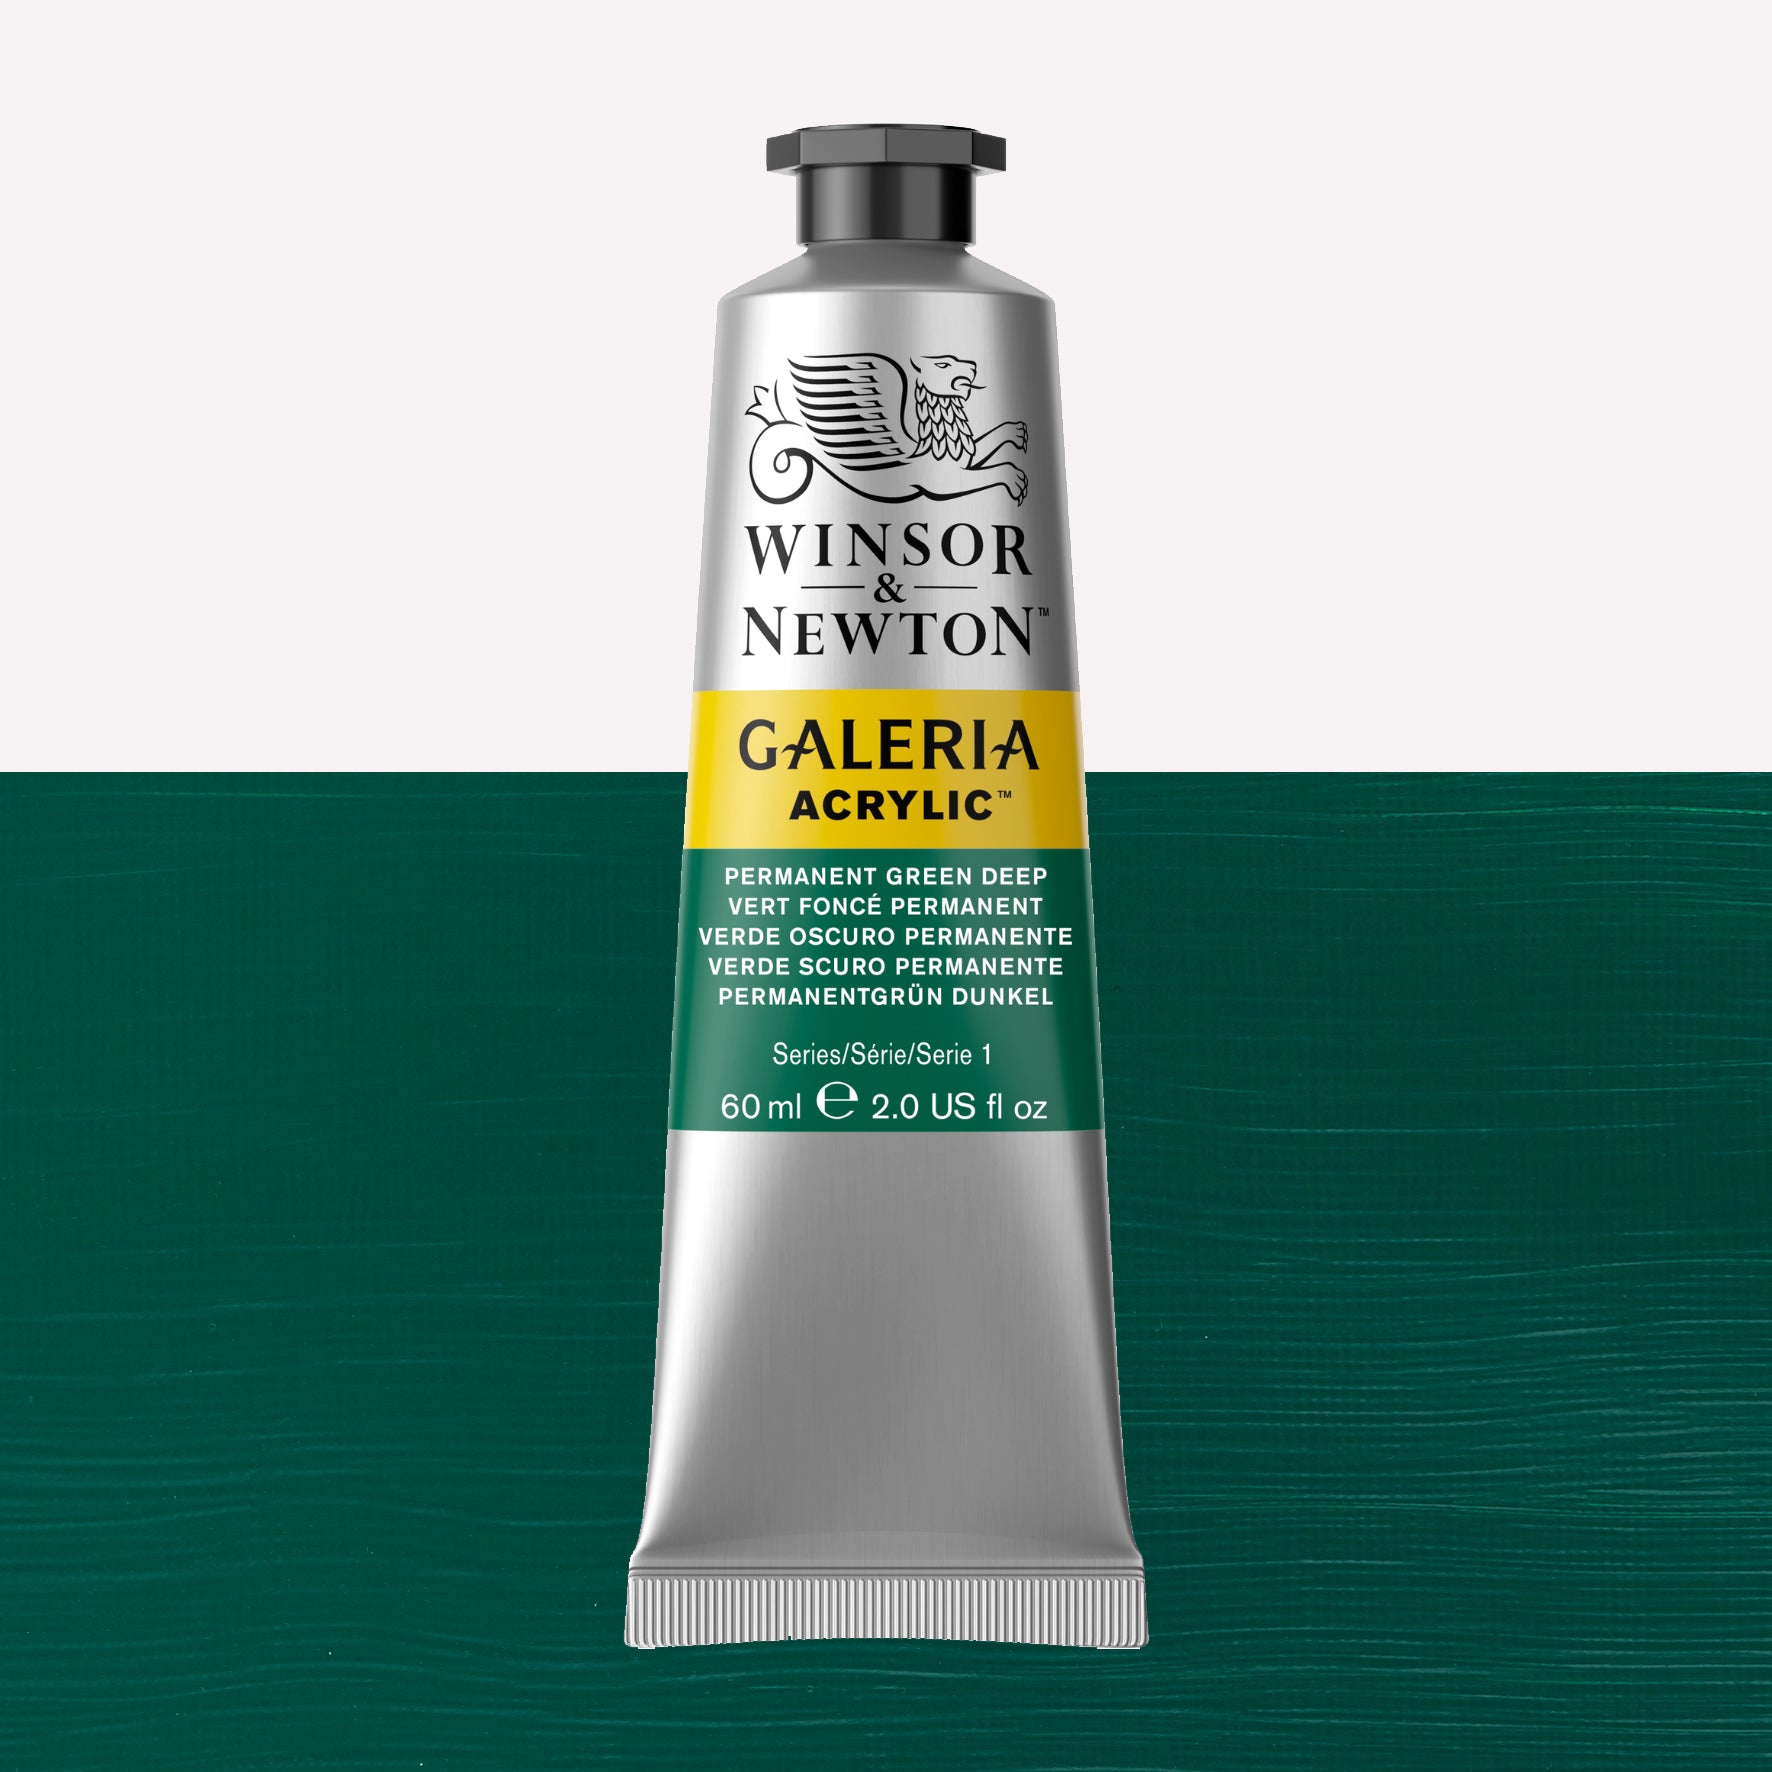 A 60ml tube of vibrant Galeria Acrylic paint in the shade Permanent Green Deep. This professional-quality paint is packaged in a silver tube with a black lid. Made by Winsor and Newton.